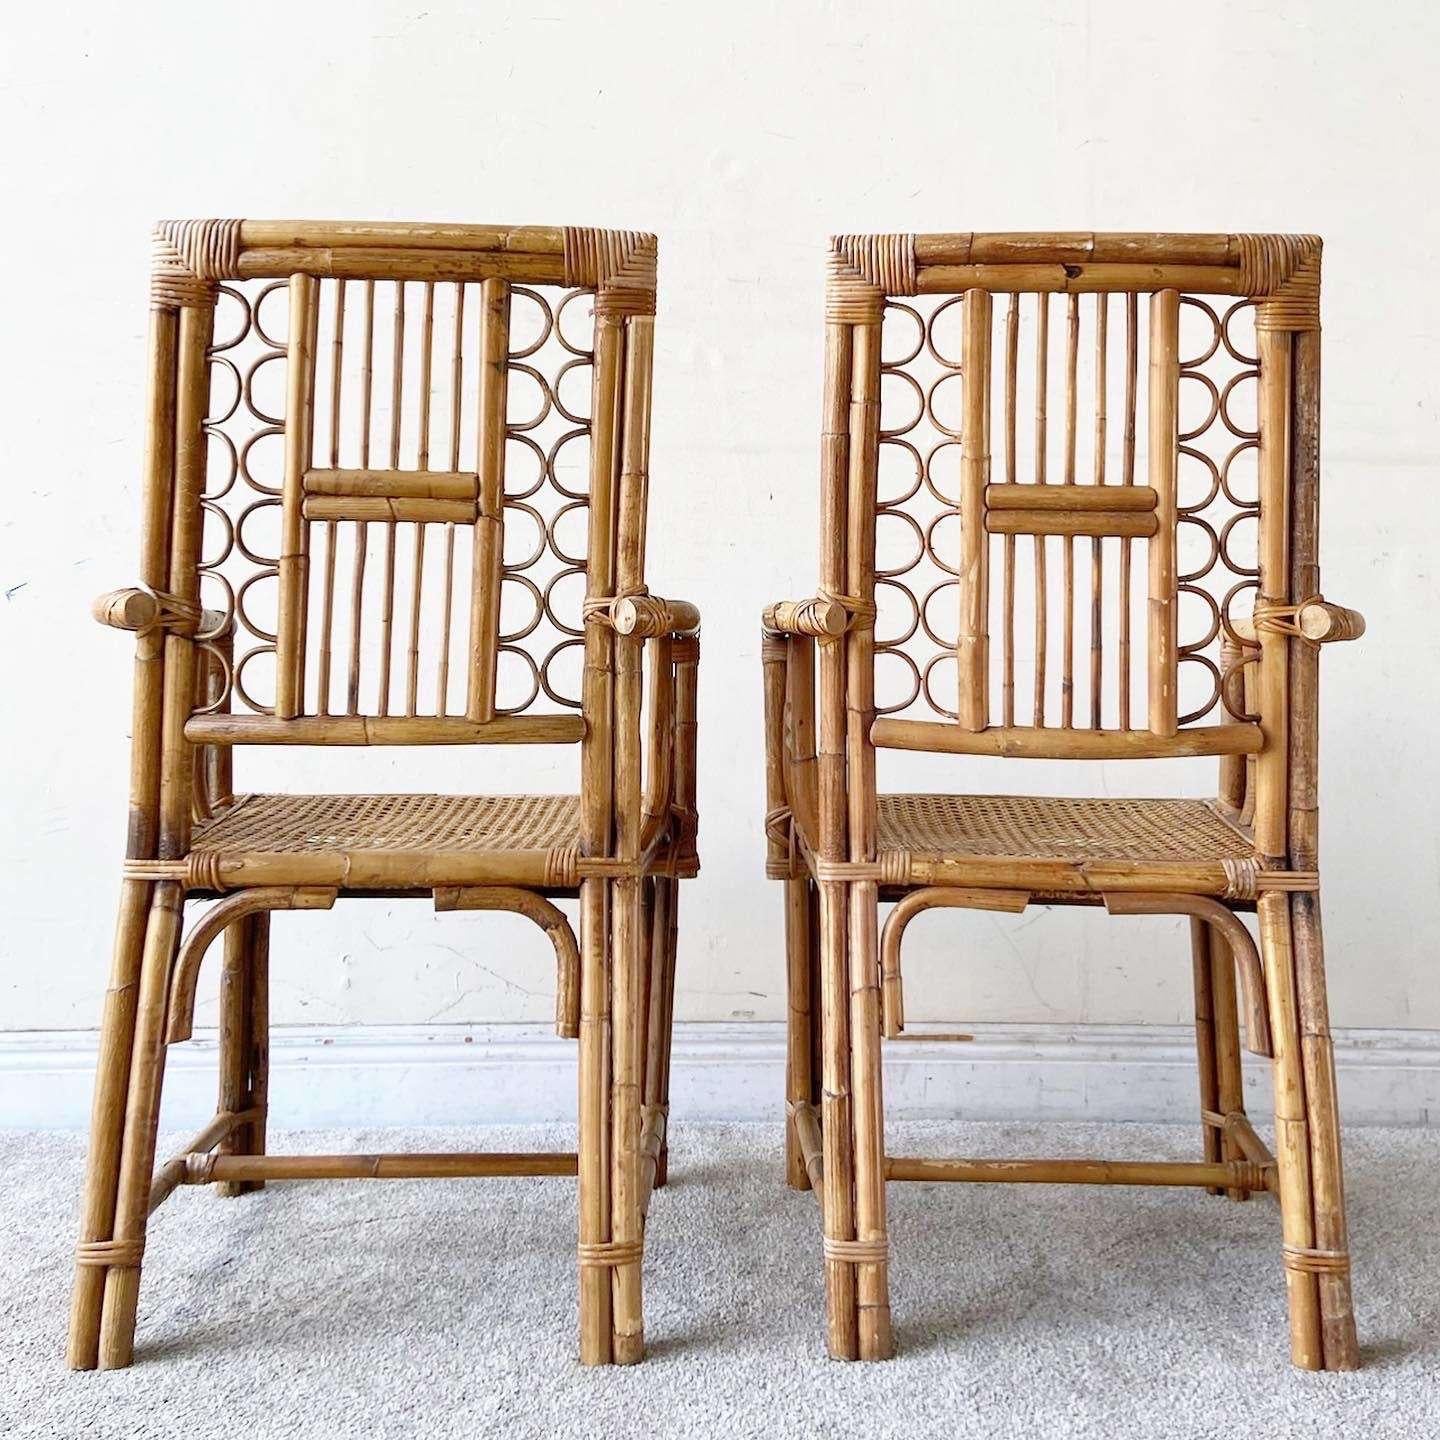 Boho Chic Bamboo Rattan and Cane Dining Chairs Attributed to Brighton - a Pair For Sale 2